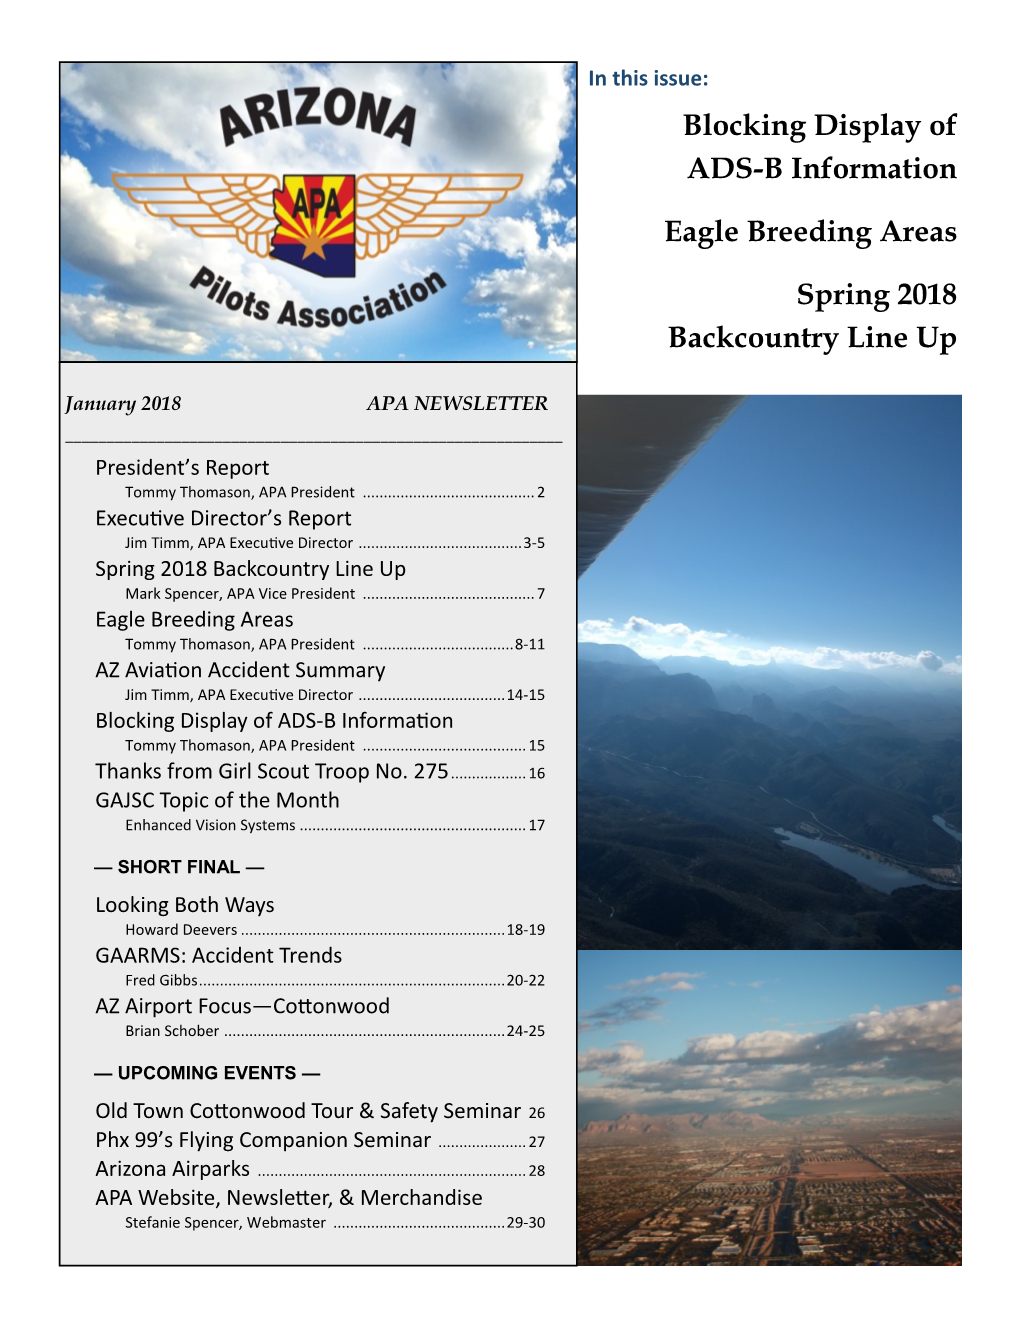 Blocking Display of ADS-B Information Eagle Breeding Areas Spring 2018 Backcountry Line Up